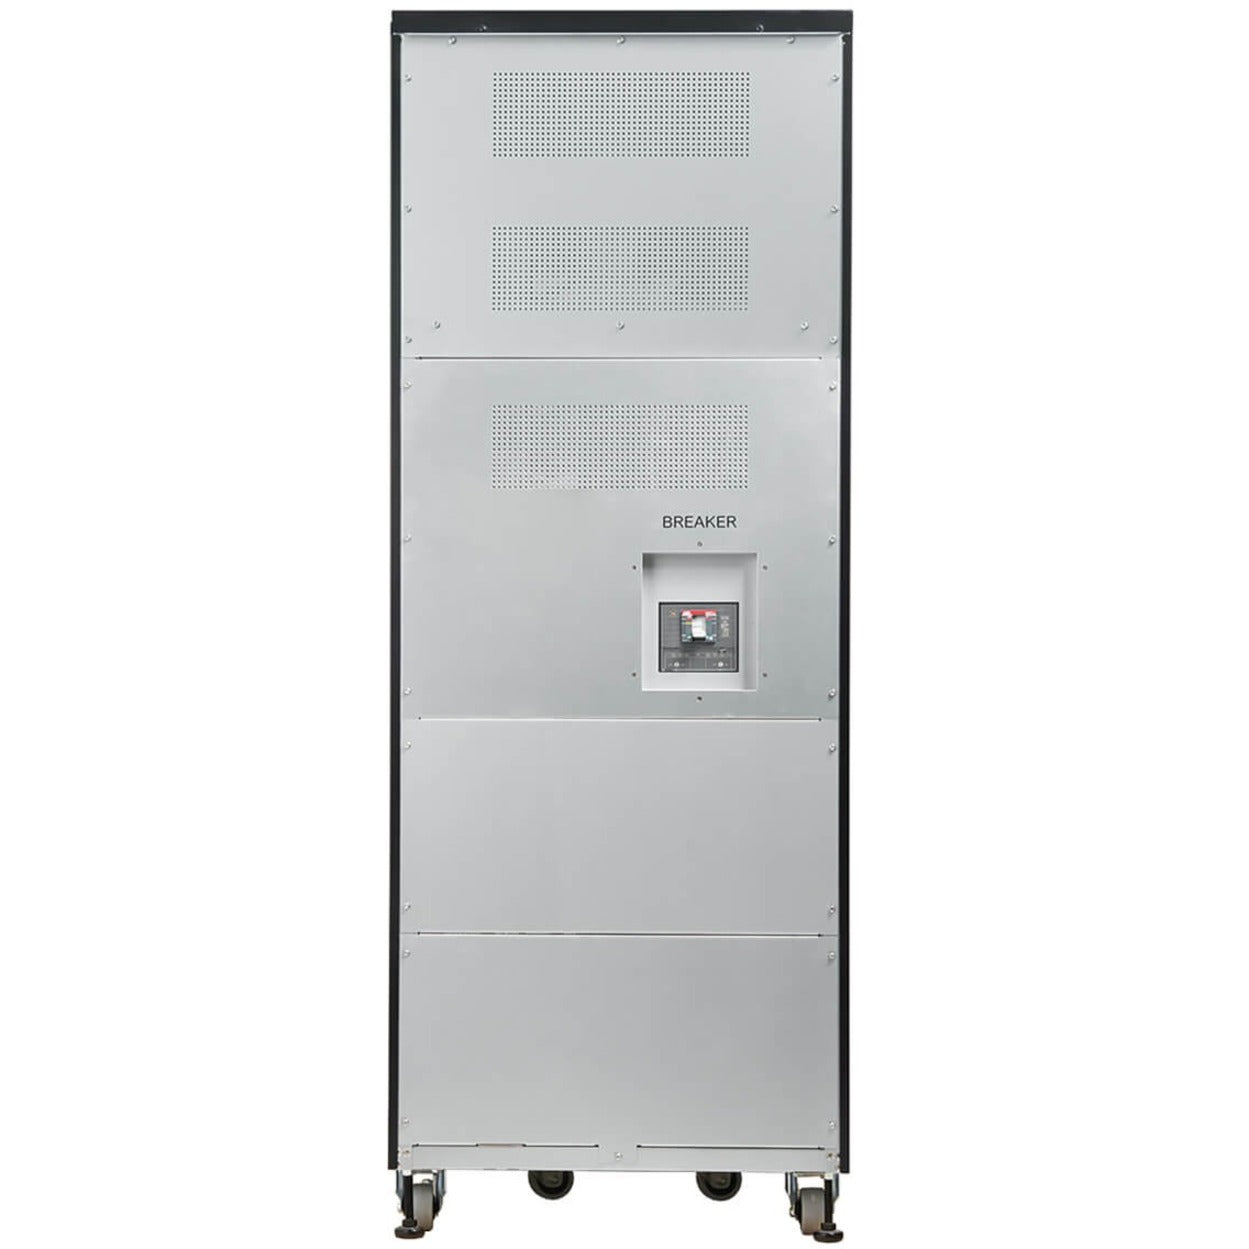 Tripp Lite &#177;120VDC External Battery Cabinet for Select 10-50K S3M-Series 3-Phase UPS Requires 40x 40Ah Batteries (Not Included)